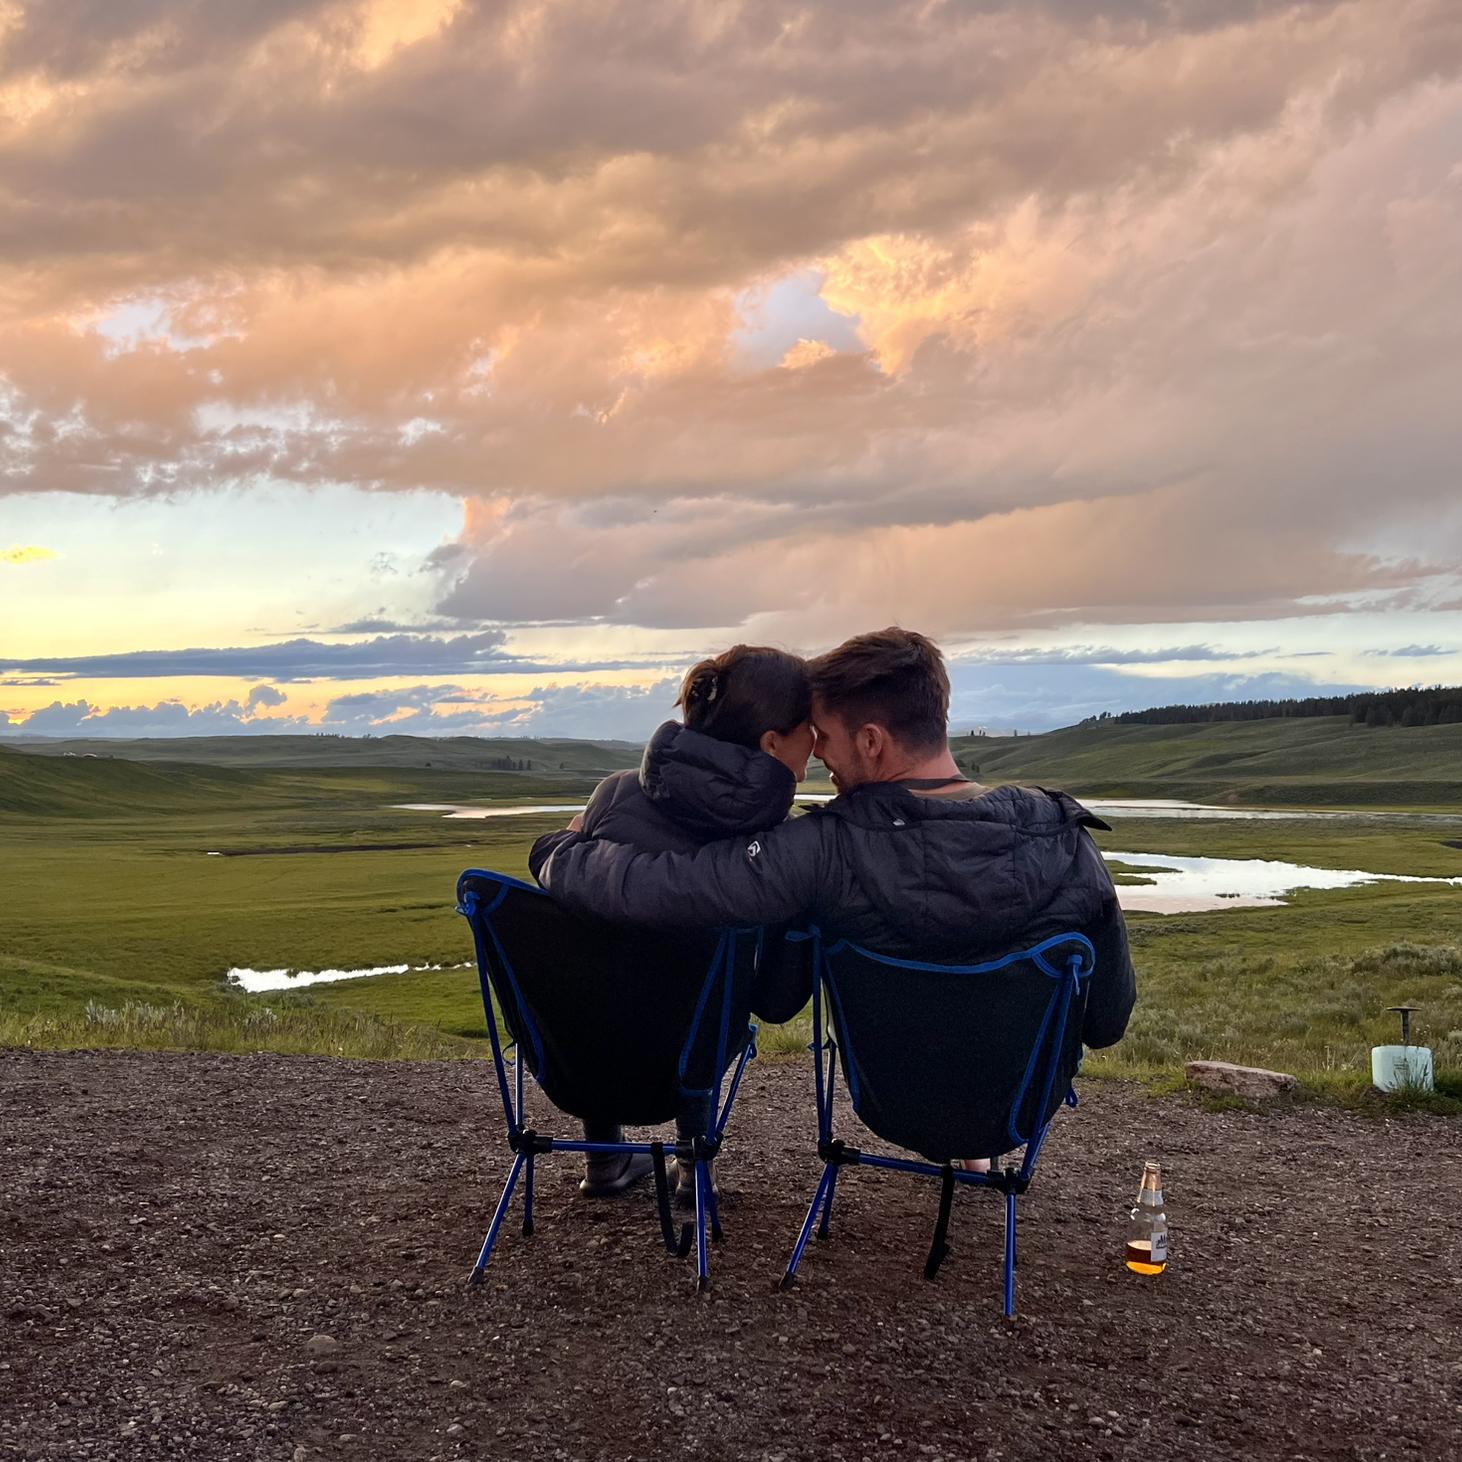 Watching the sunset in Yellowstone just outside of our rented RV at an overlook.